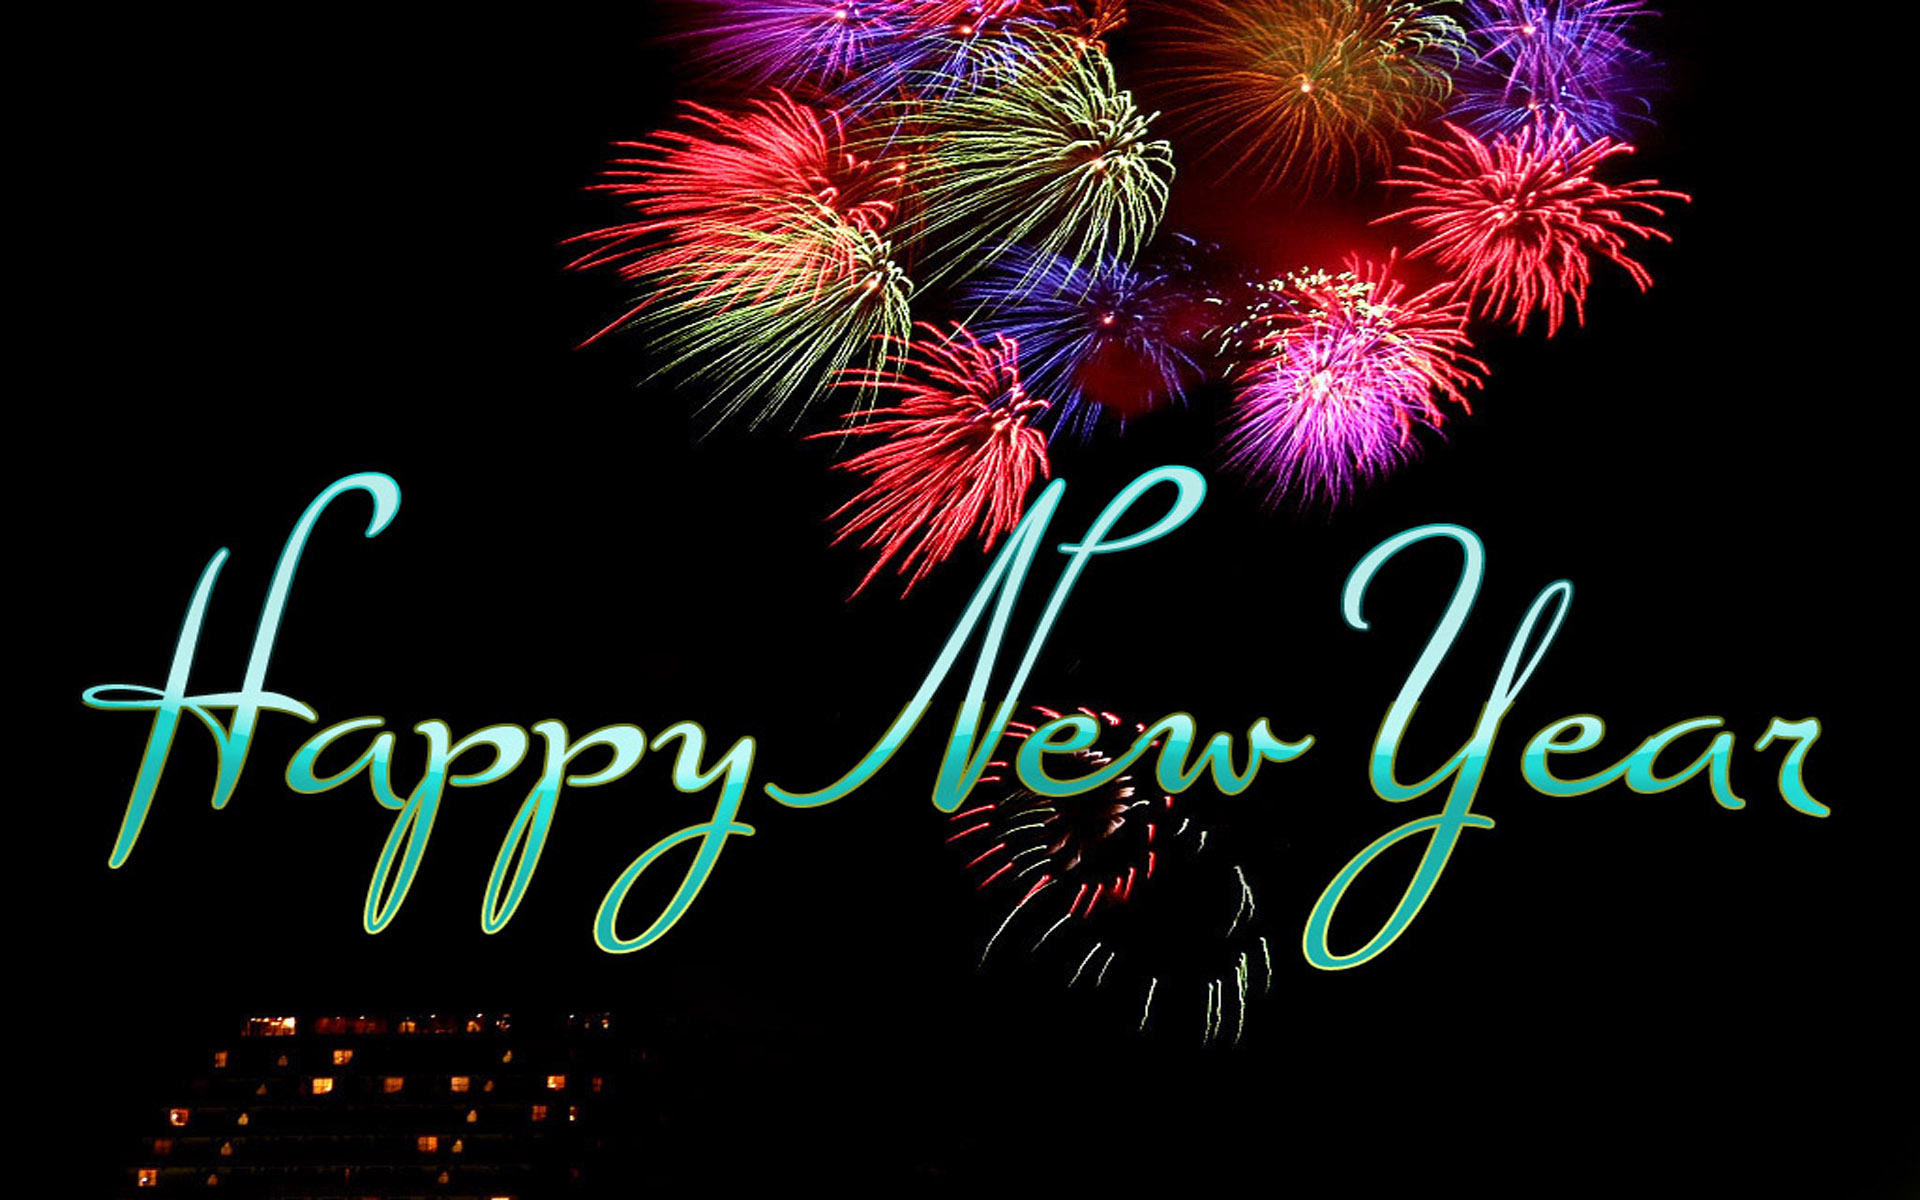 super best new year wallpapers